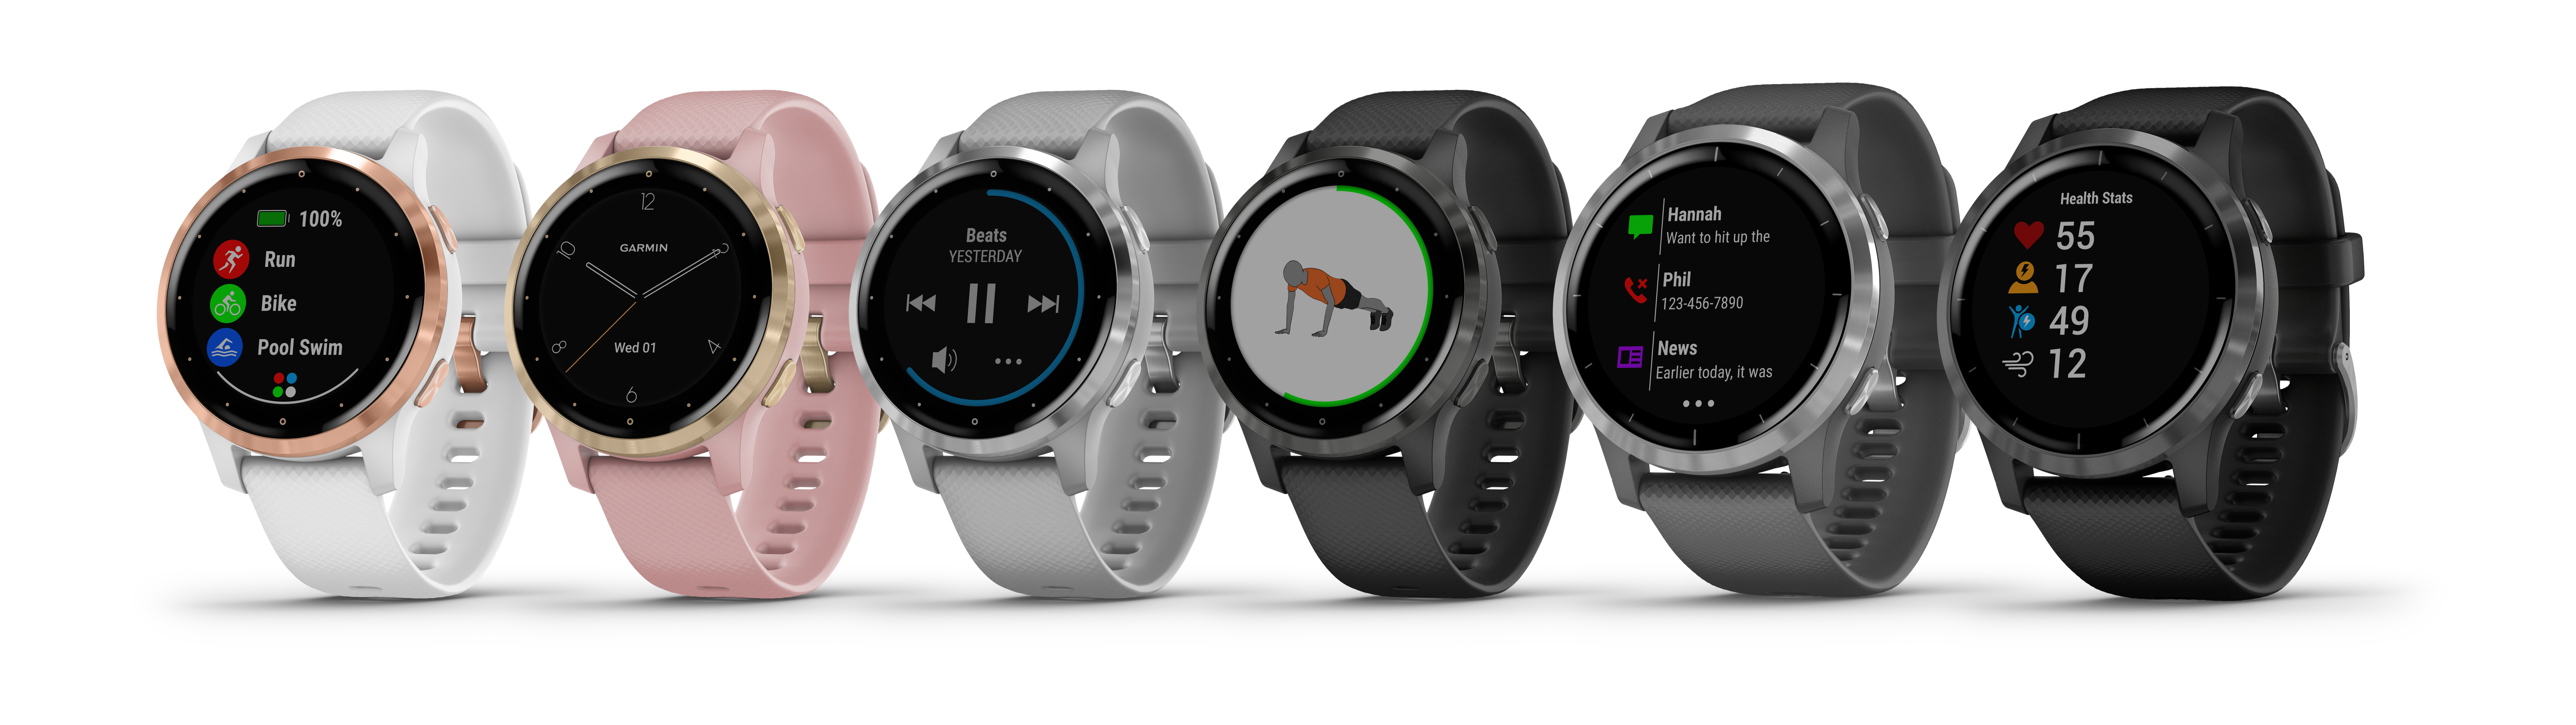 Introducing Garmin® vívoactive® 4 and 4S GPS smartwatches with 